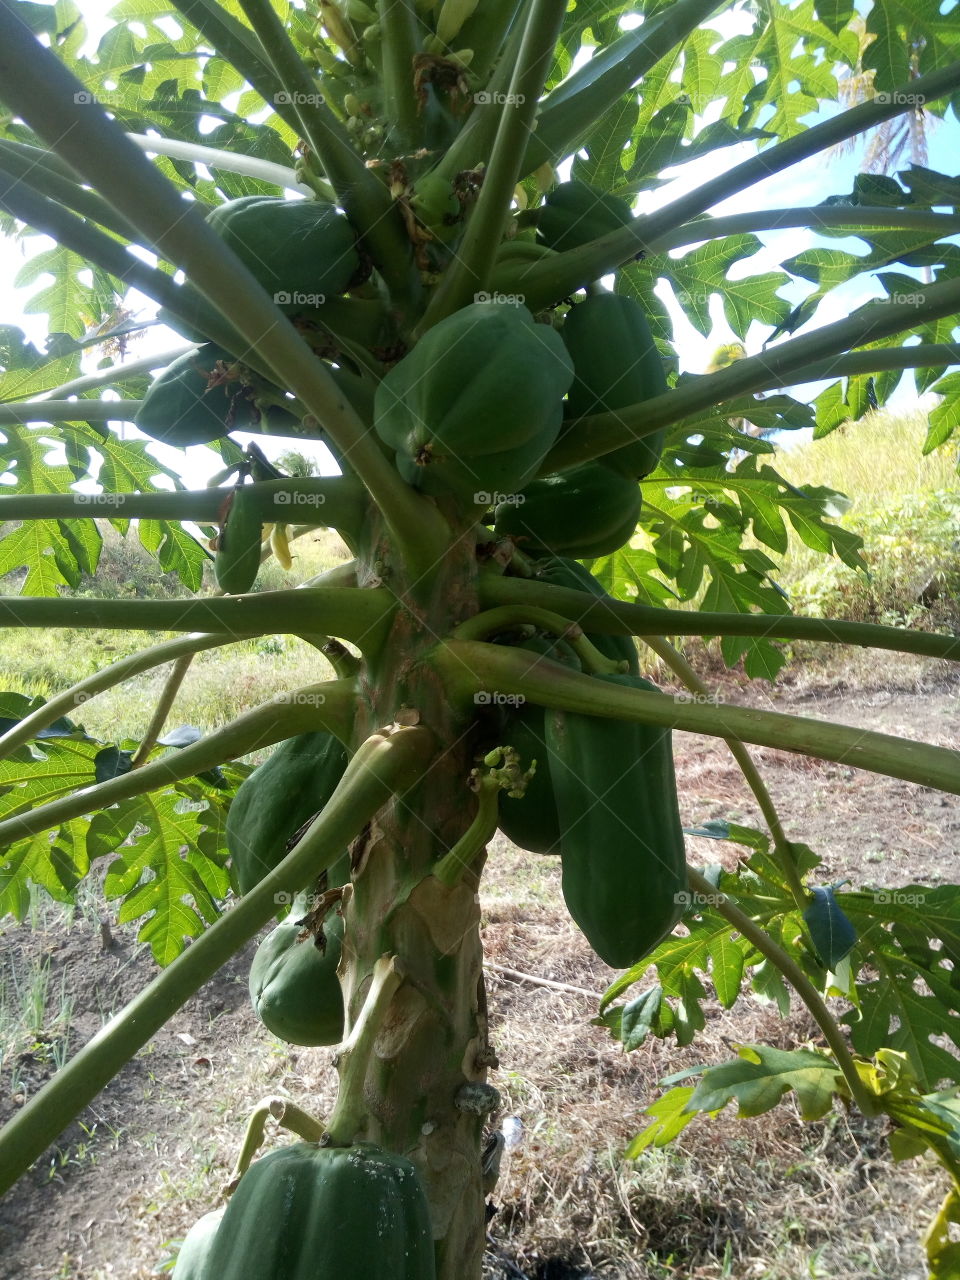 the papaya plant for vegestable,food,fruit.